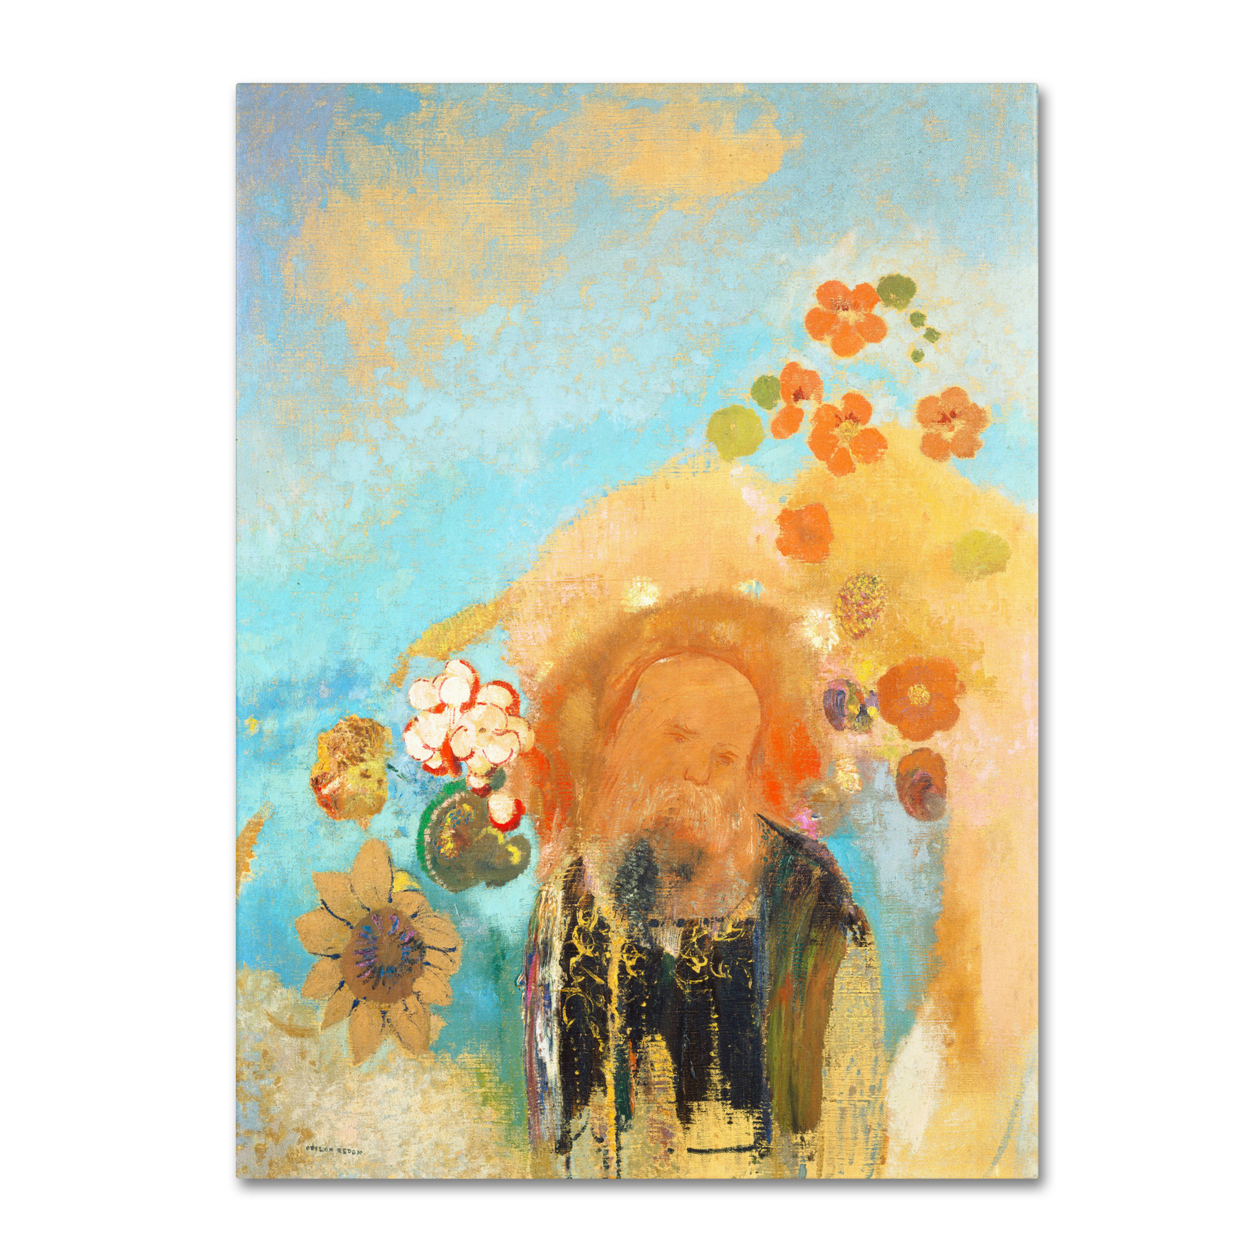 Odilon Redon 'Evocation Of Roussel 1912' Canvas Wall Art 35 X 47 Inches